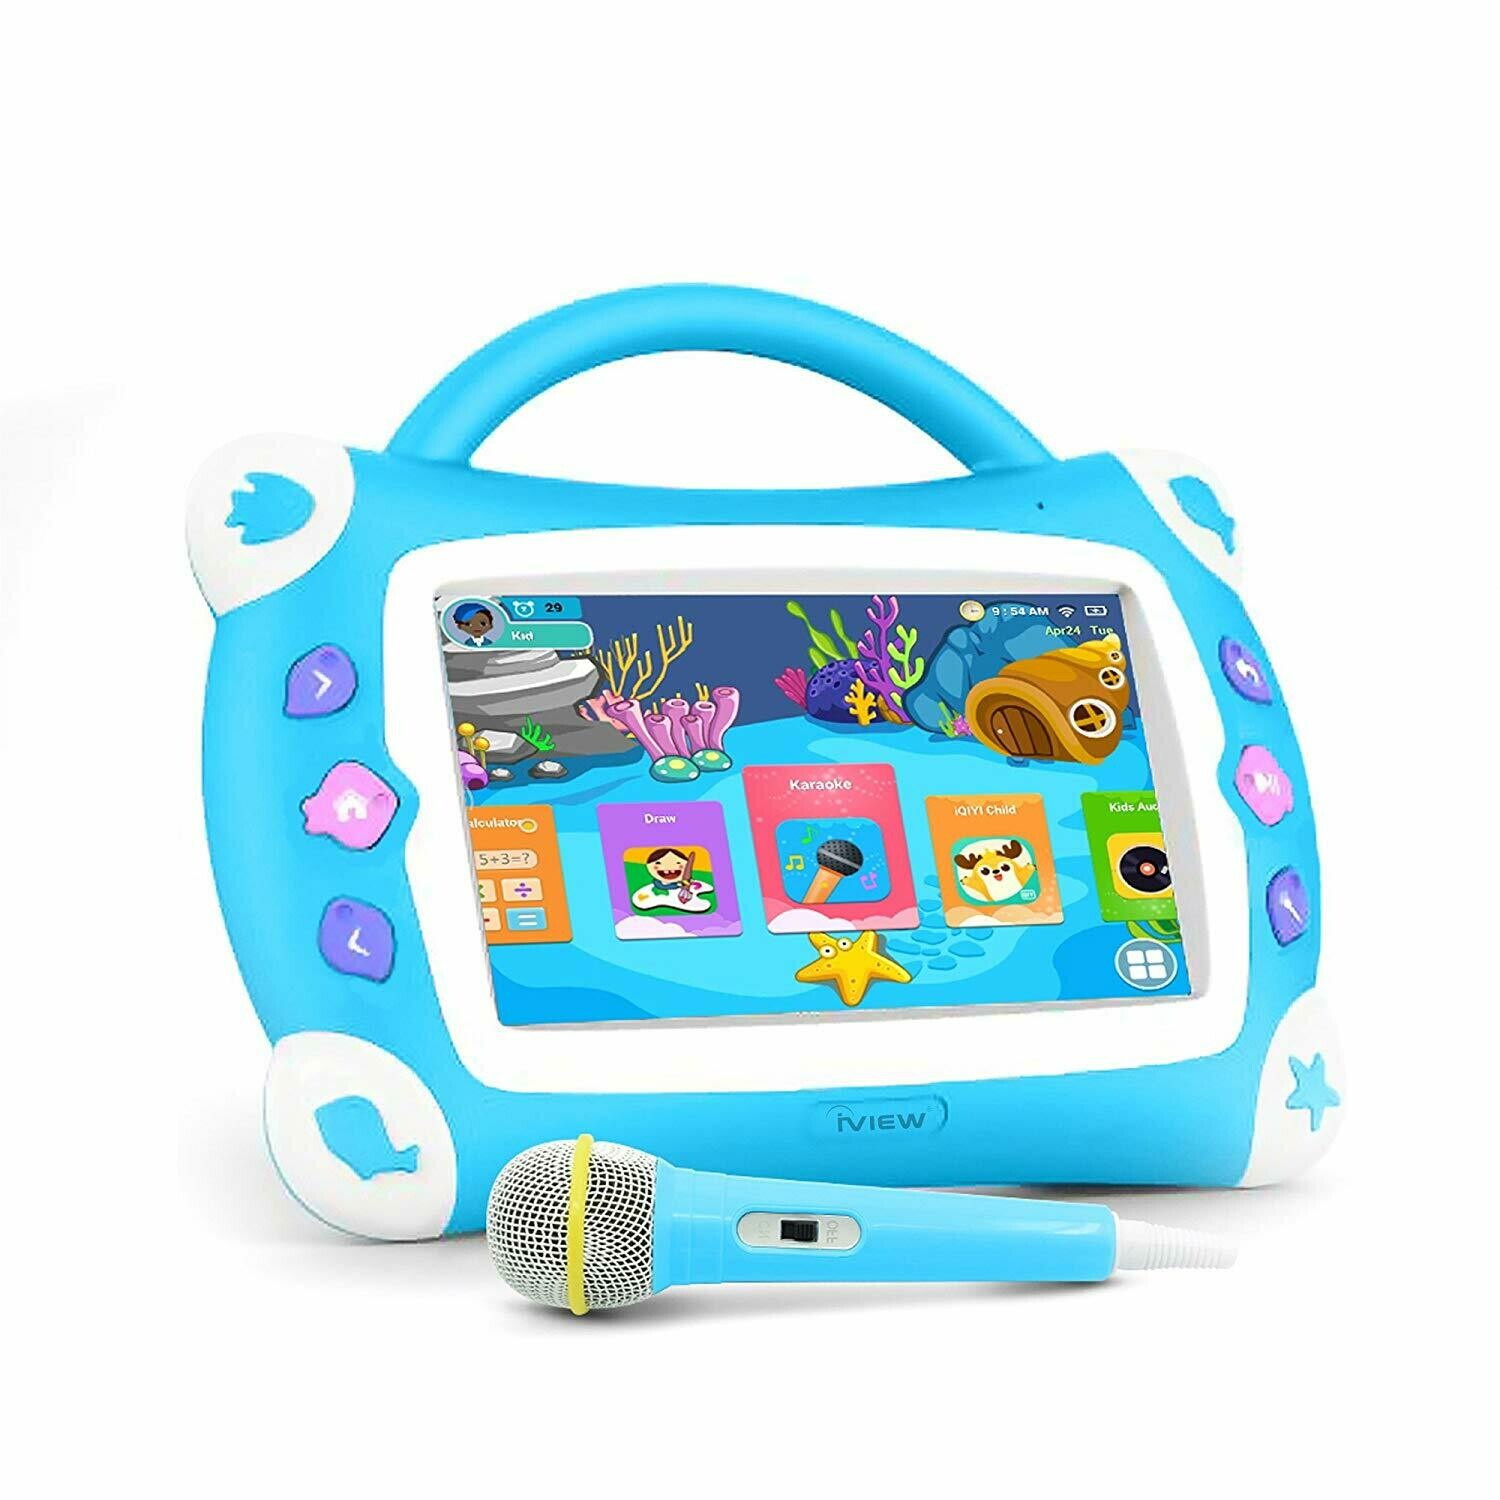 iView Sing Pad 711TPC, 7” Kids Tablet with WiFi, Microphone, Preloaded Children’s Games, Karaoke, Parental Control, Tablet Case with Built-in Stand